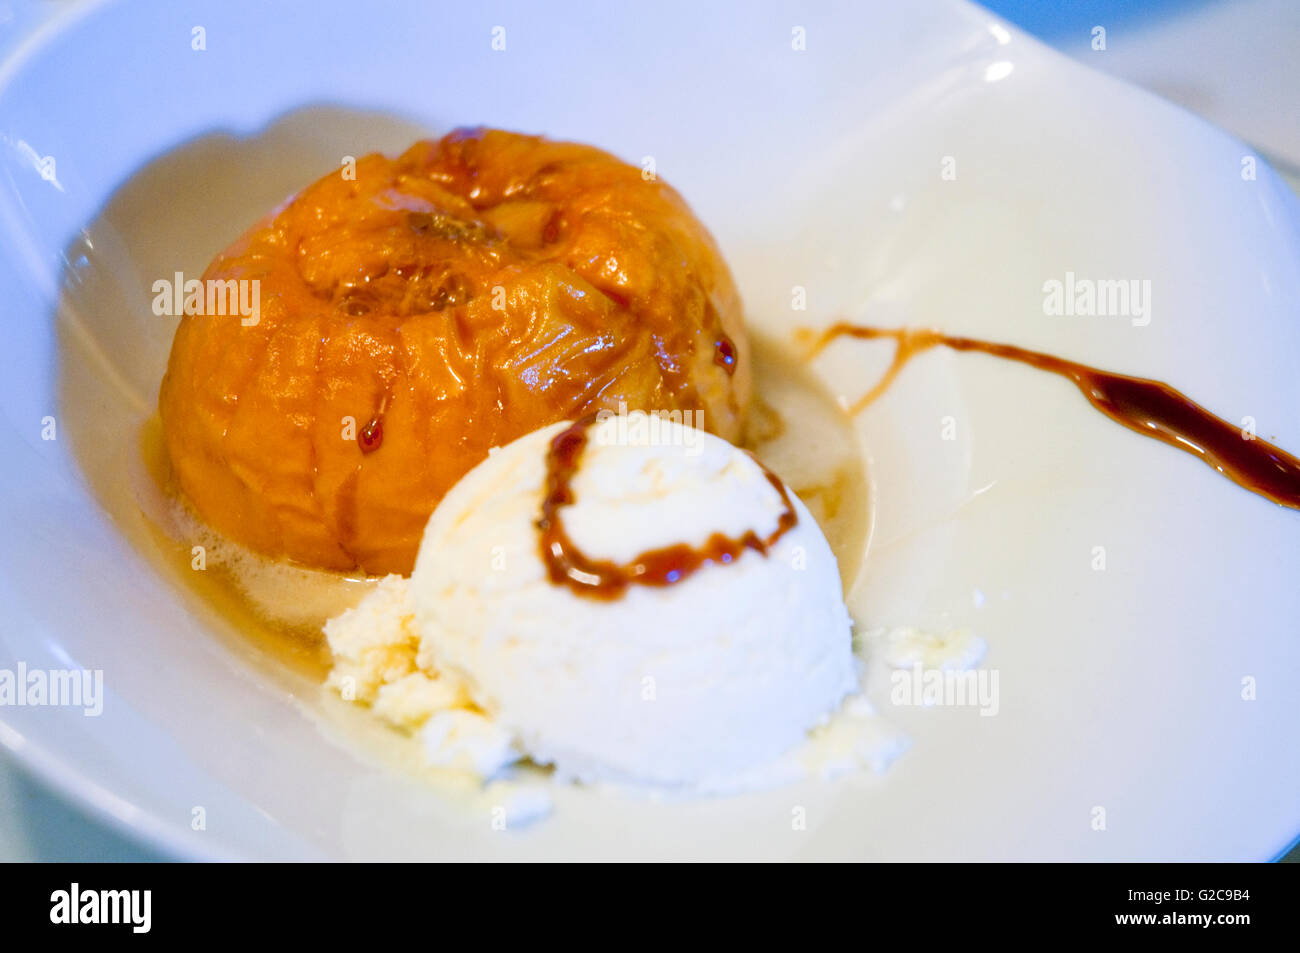 Dessert: baked peach with cheese ice cream. Close view. Stock Photo